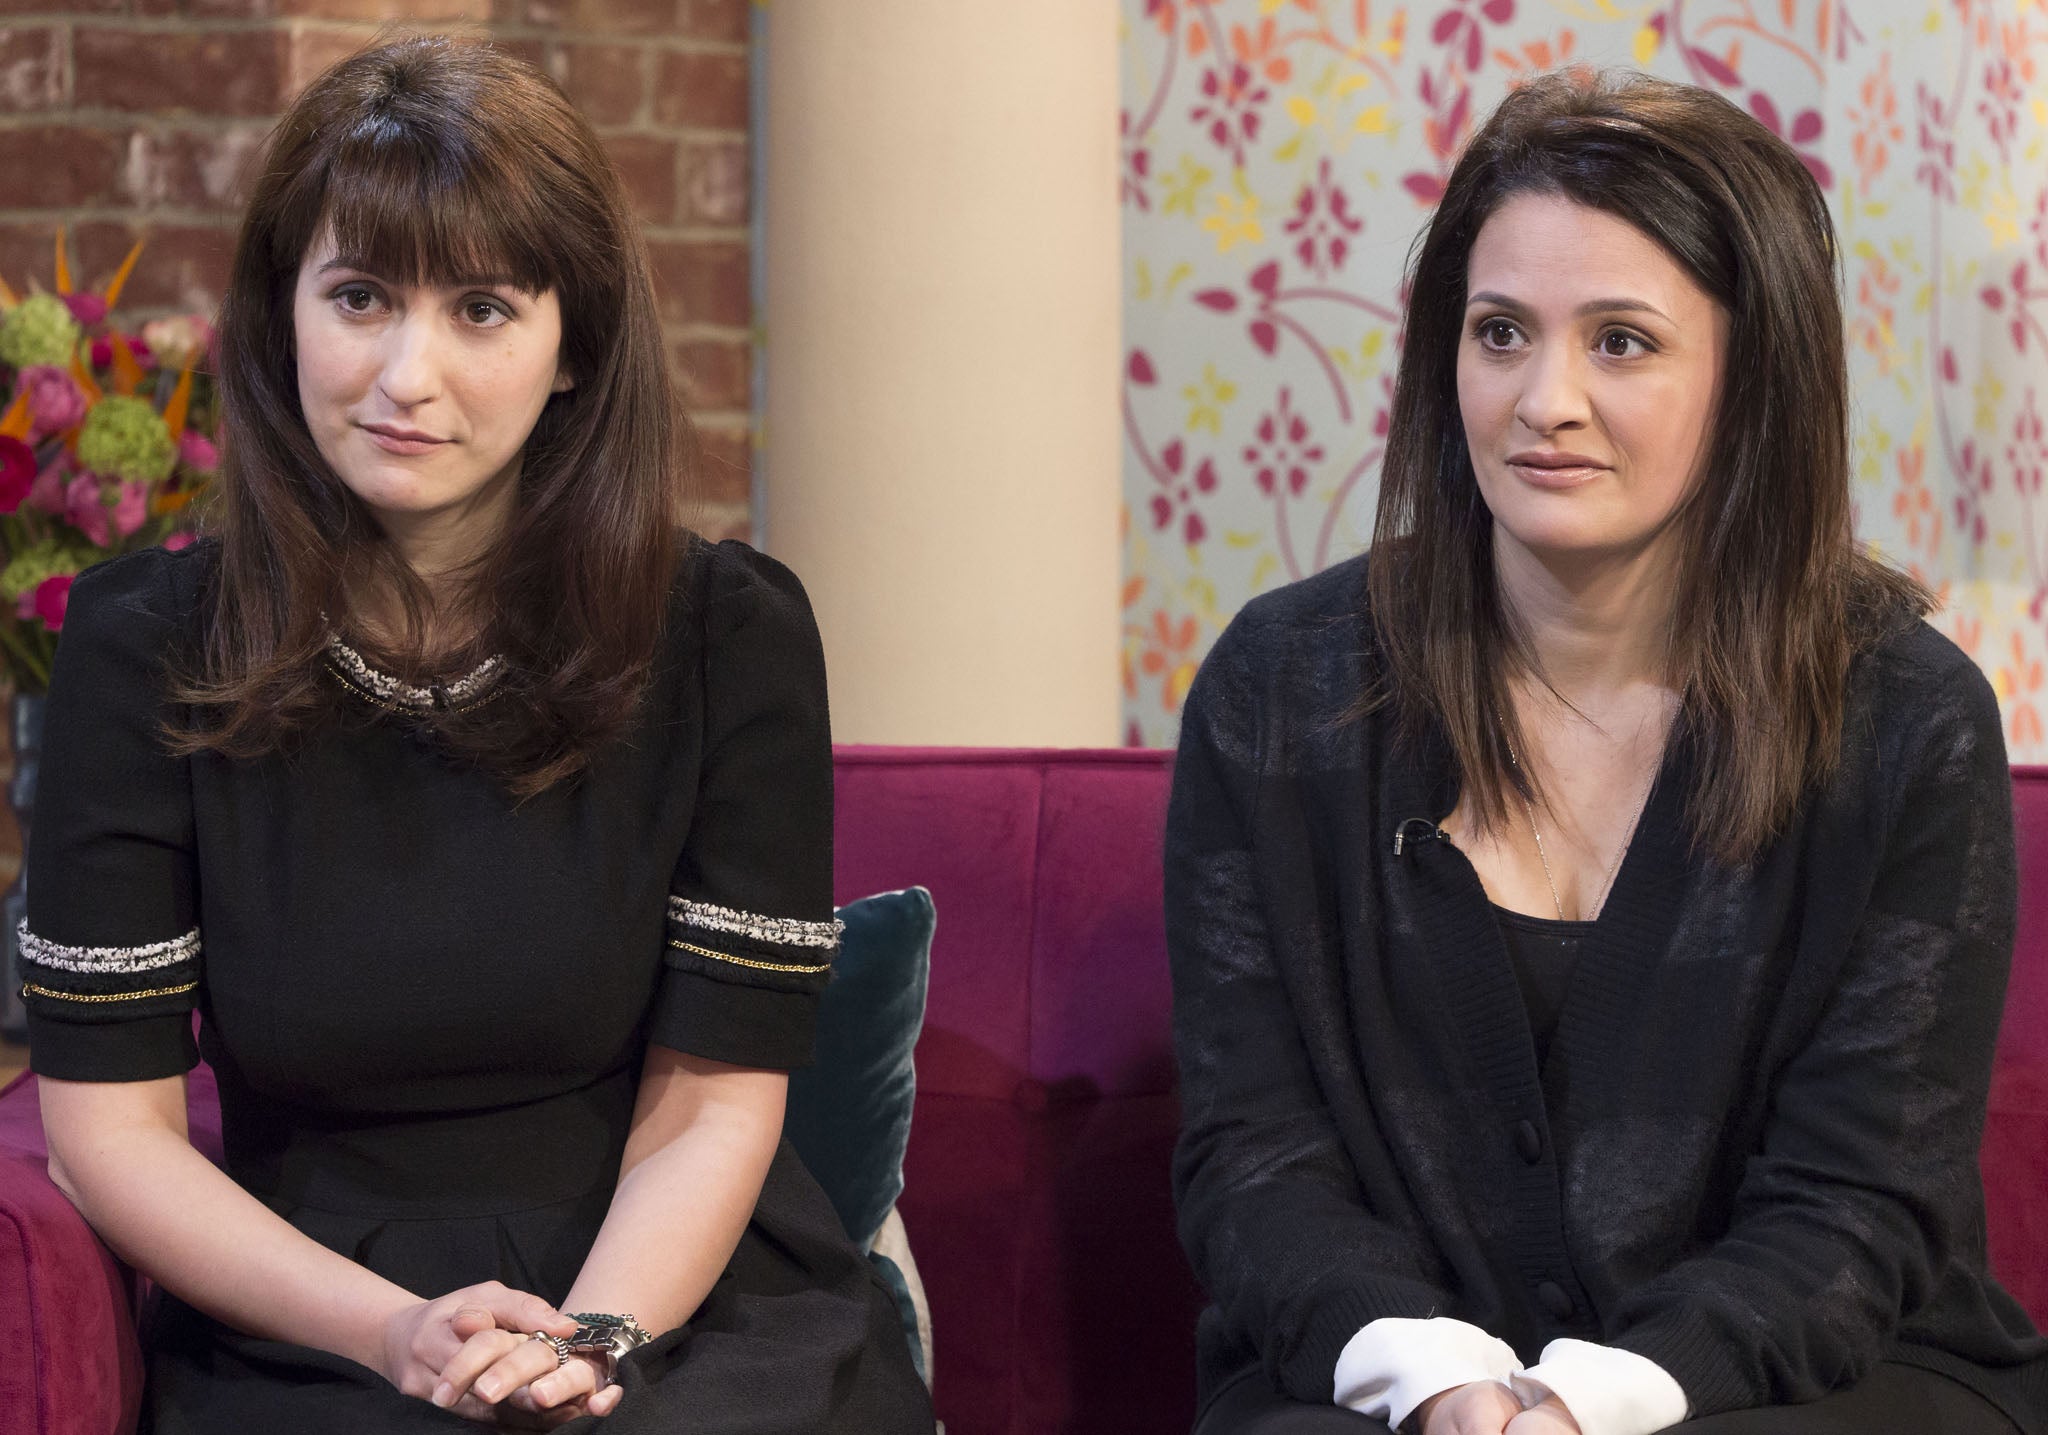 Nigella Lawson’s former assistants Elisabetta and Francesca Grillo appeared on This Morning today.